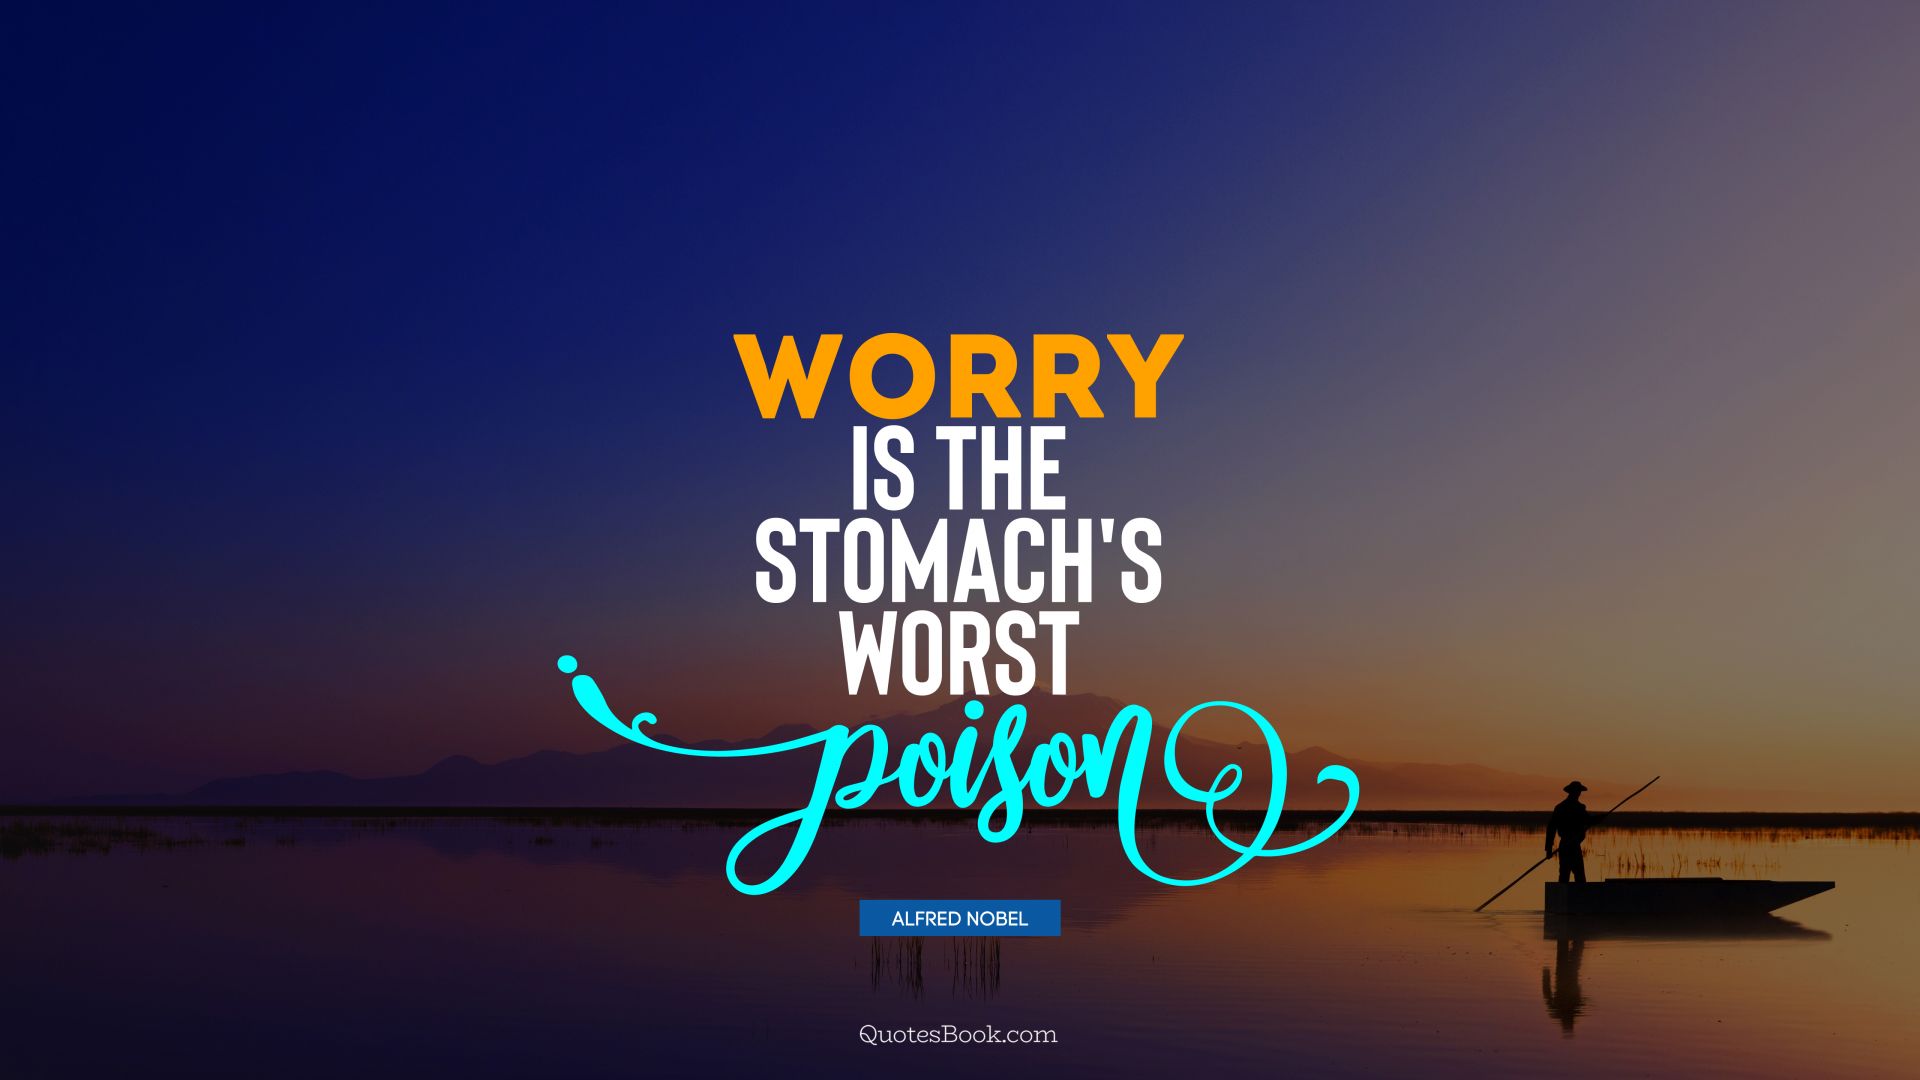 Worry is the stomach's worst poison. - Quote by Alfred Nobel